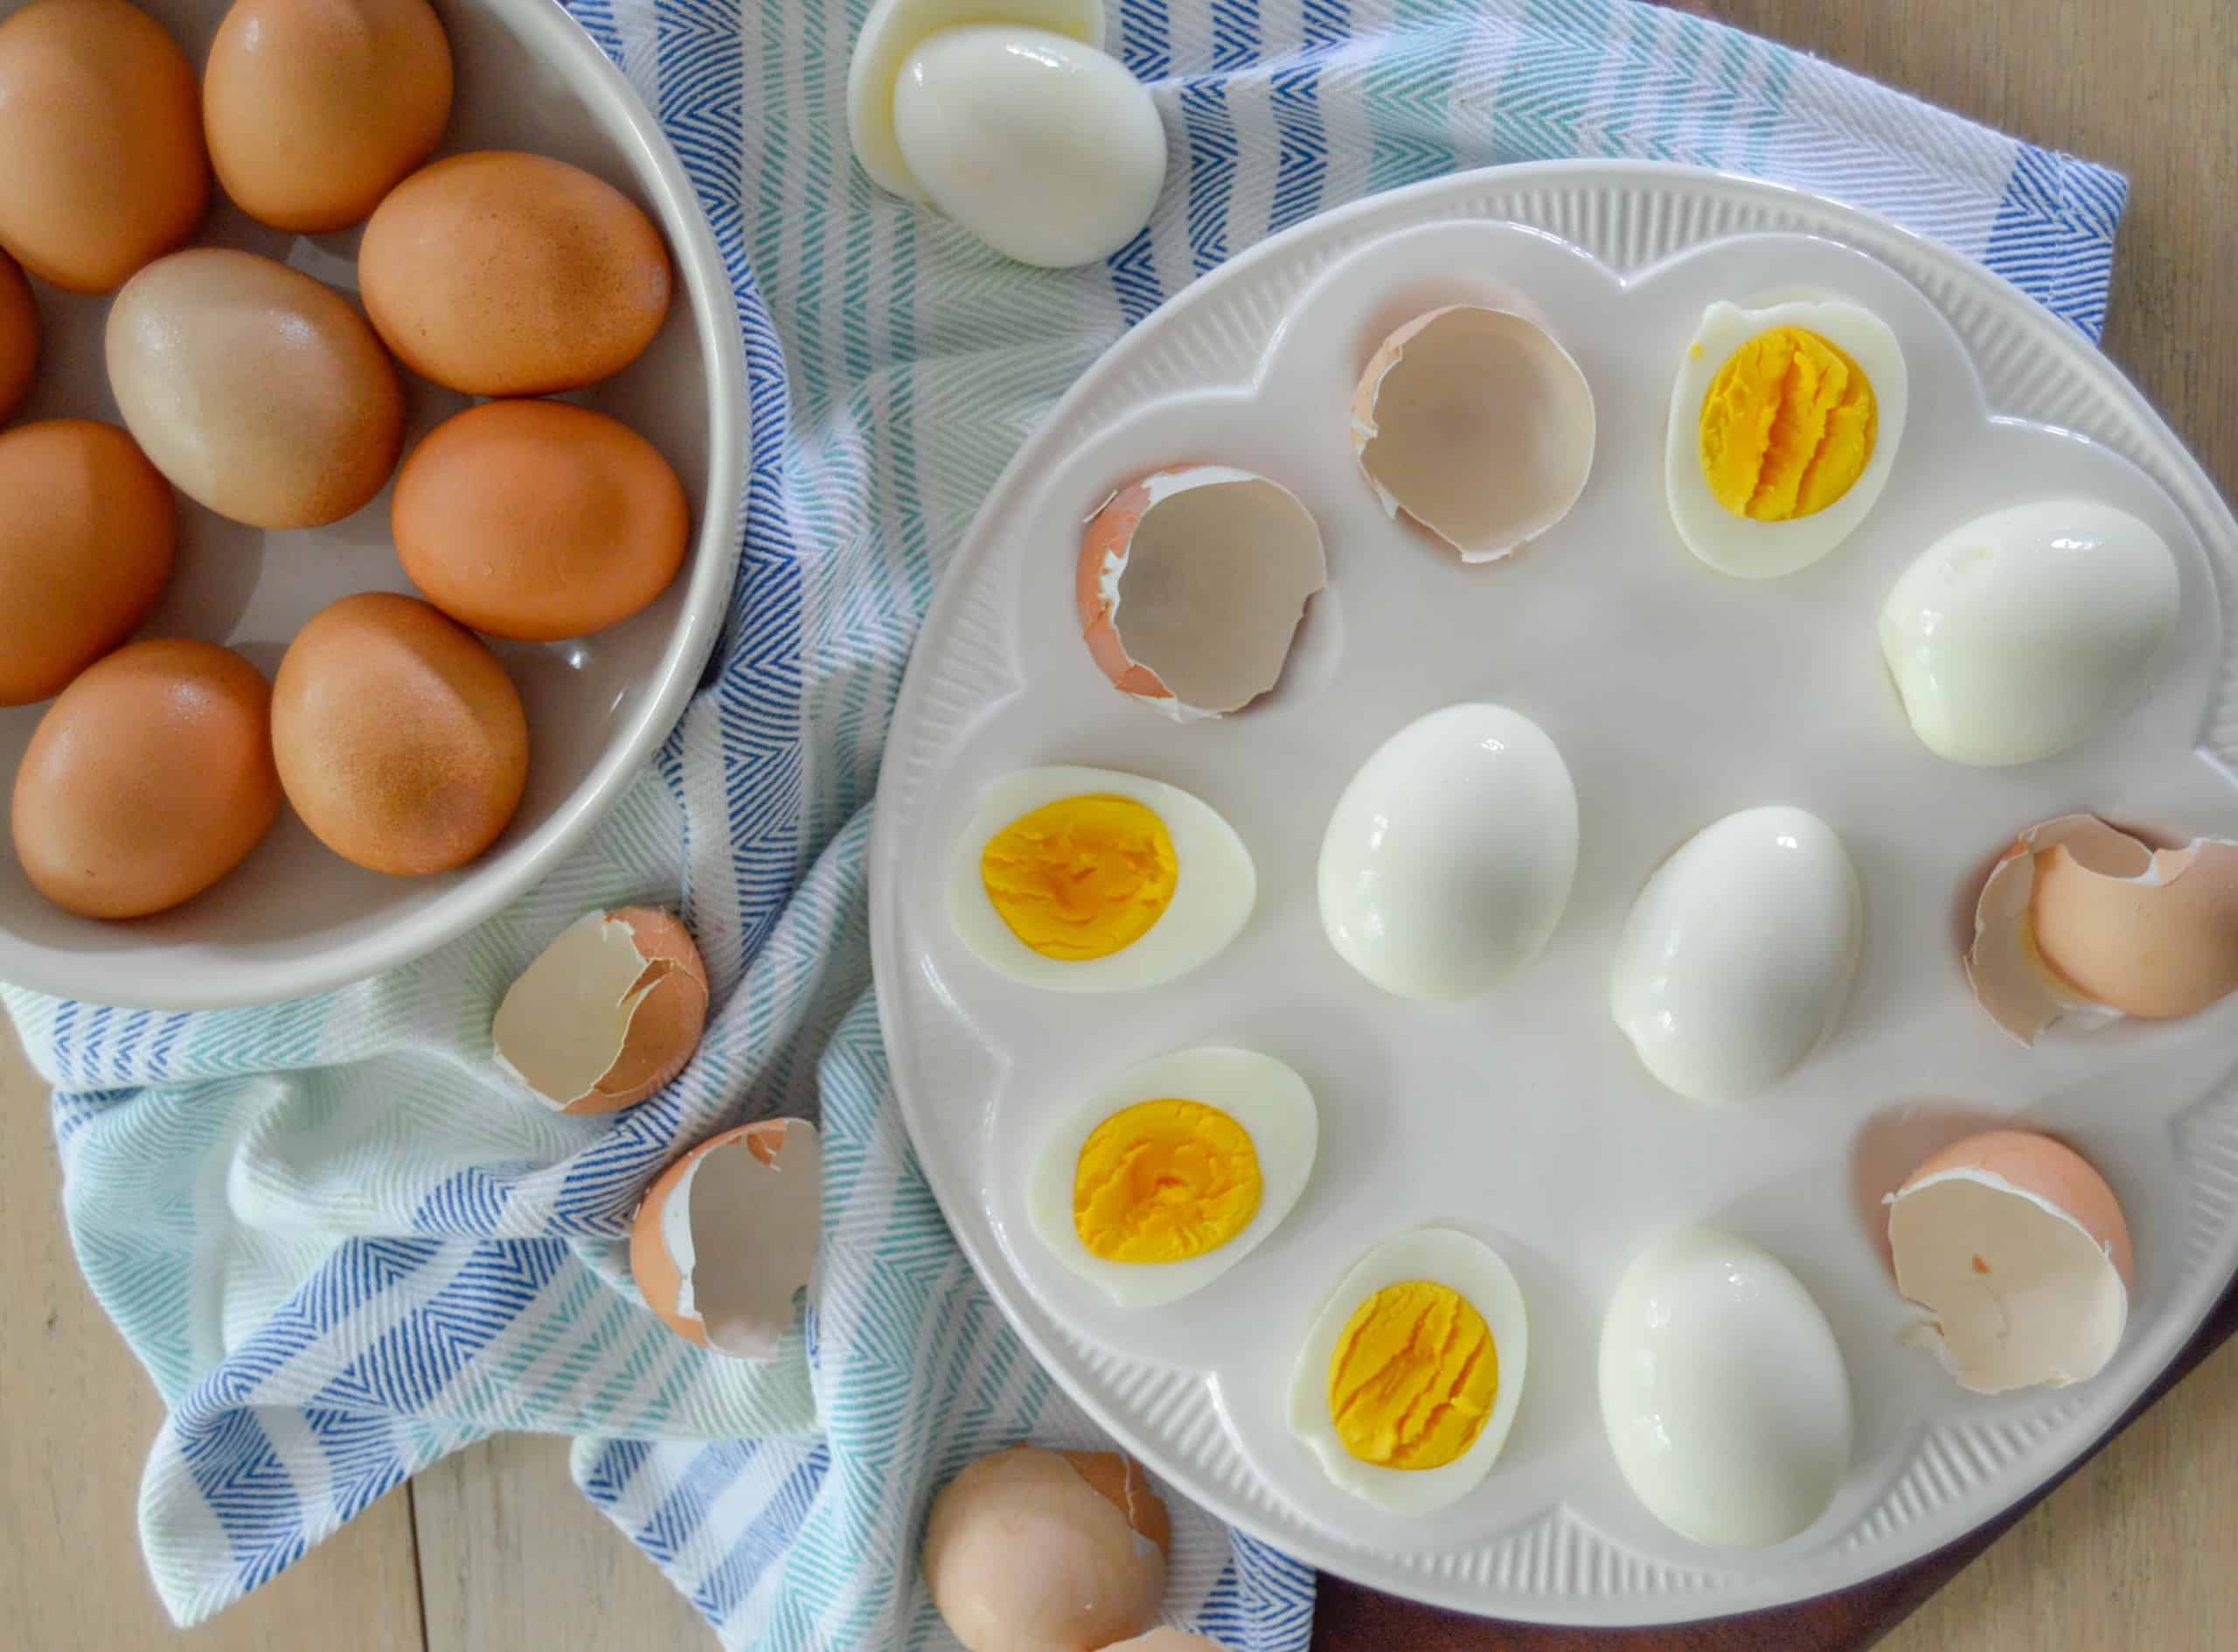 Easy peel Hard boiled eggs half peeled next to shells with hard boiled eggs in bowl